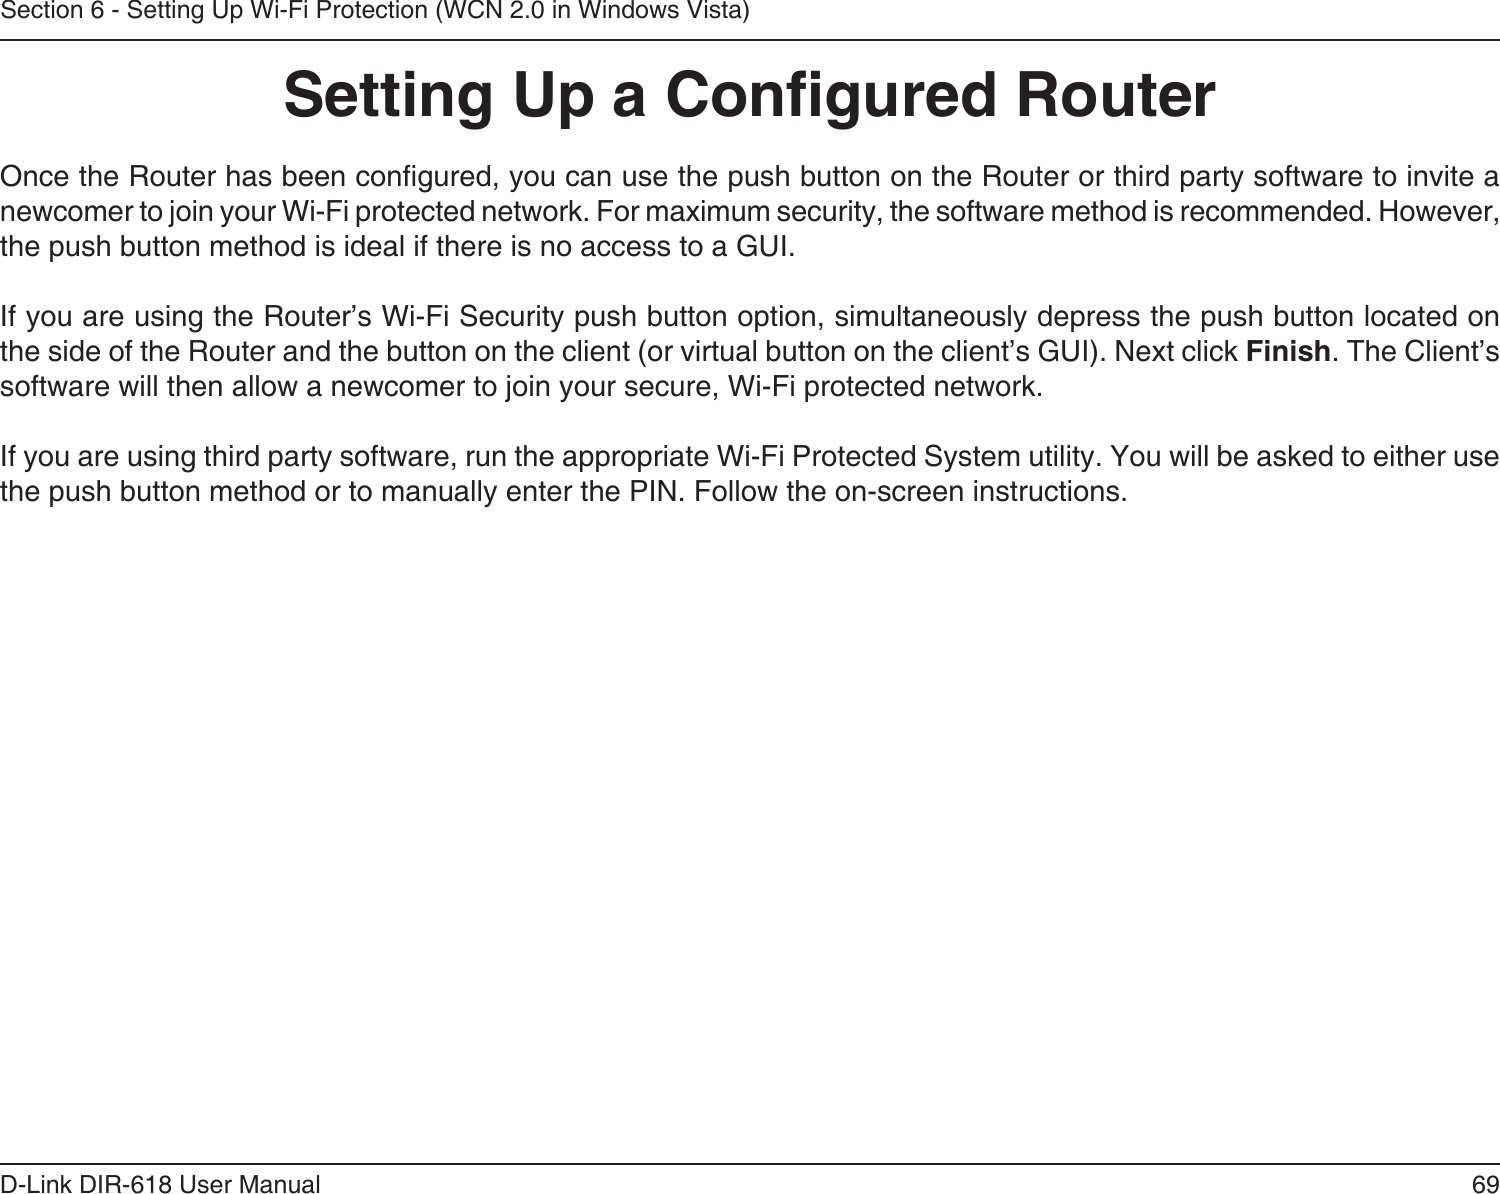 69D-Link DIR-618 User ManualSection 6 - Setting Up Wi-Fi Protection (WCN 2.0 in Windows Vista)Setting Up a Congured RouterOnce the Router has been congured, you can use the push button on the Router or third party software to invite a newcomer to join your Wi-Fi protected network. For maximum security, the software method is recommended. However, the push button method is ideal if there is no access to a GUI.If you are using the Router’s Wi-Fi Security push button option, simultaneously depress the push button located on the side of the Router and the button on the client (or virtual button on the client’s GUI). Next click Finish. The Client’ssoftware will then allow a newcomer to join your secure, Wi-Fi protected network.If you are using third party software, run the appropriate Wi-Fi Protected System utility. You will be asked to either use the push button method or to manually enter the PIN. Follow the on-screen instructions.        